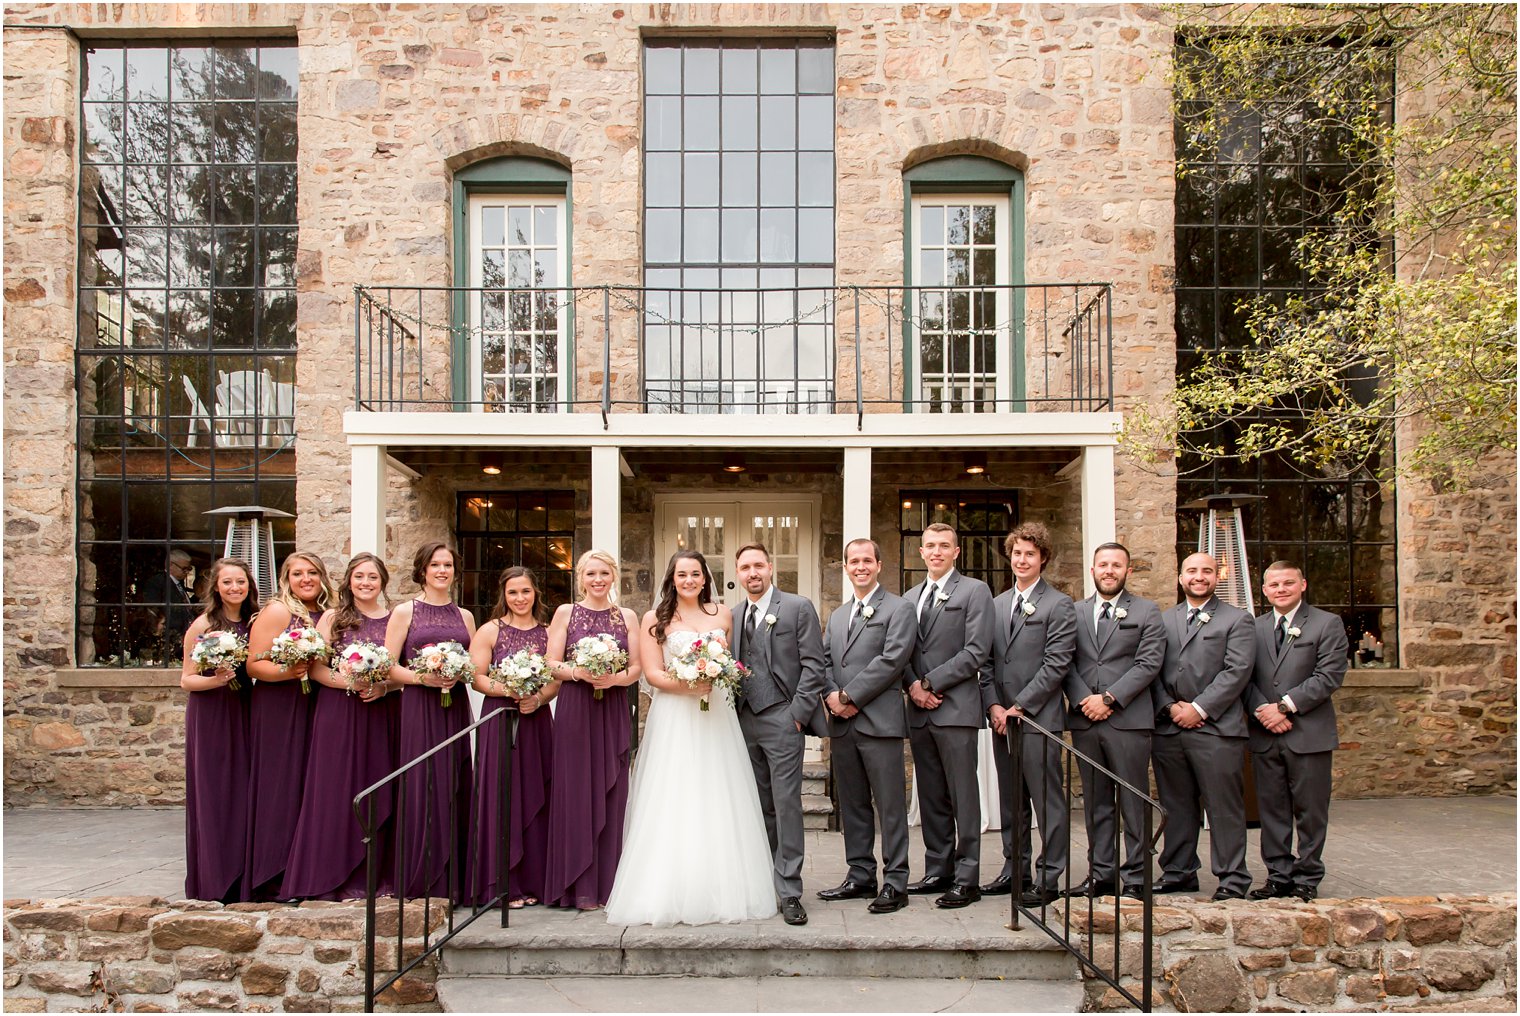 Gray and purple bridal party wedding colors | Photo by Idalia Photography